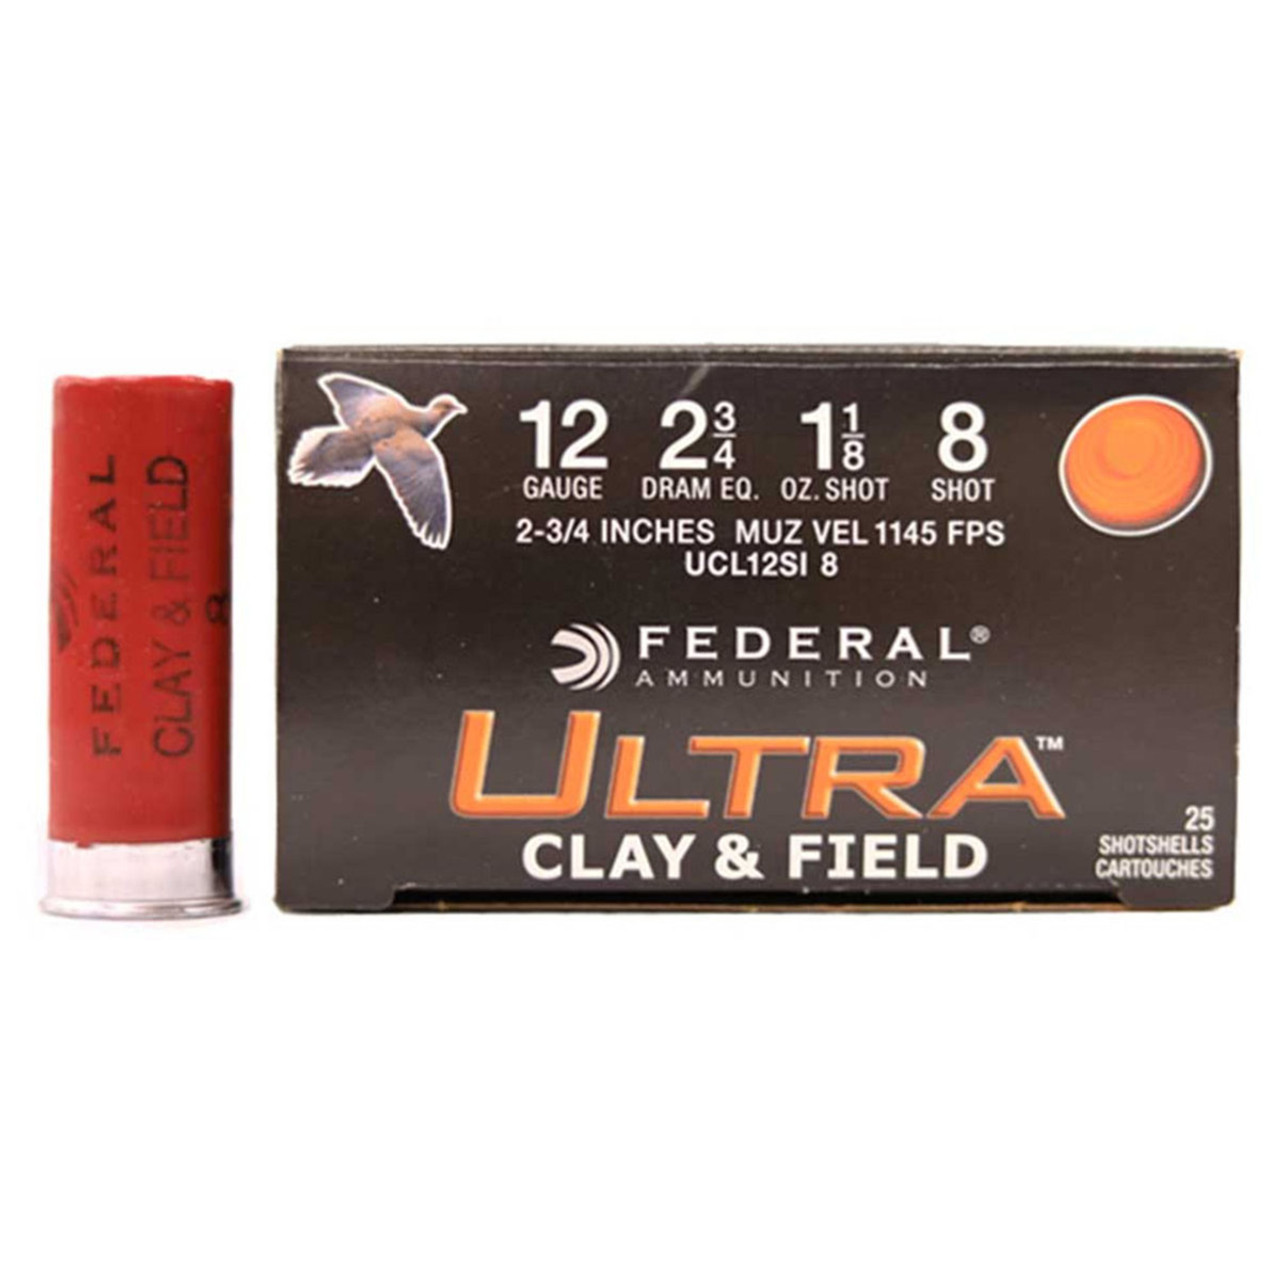 Federal Ultra Clay & Field 12 Gauge Ammunition 2-3/4 1oz #7-1/2 Lead Shot  25 Rounds - Smoky Mountain Knife Works